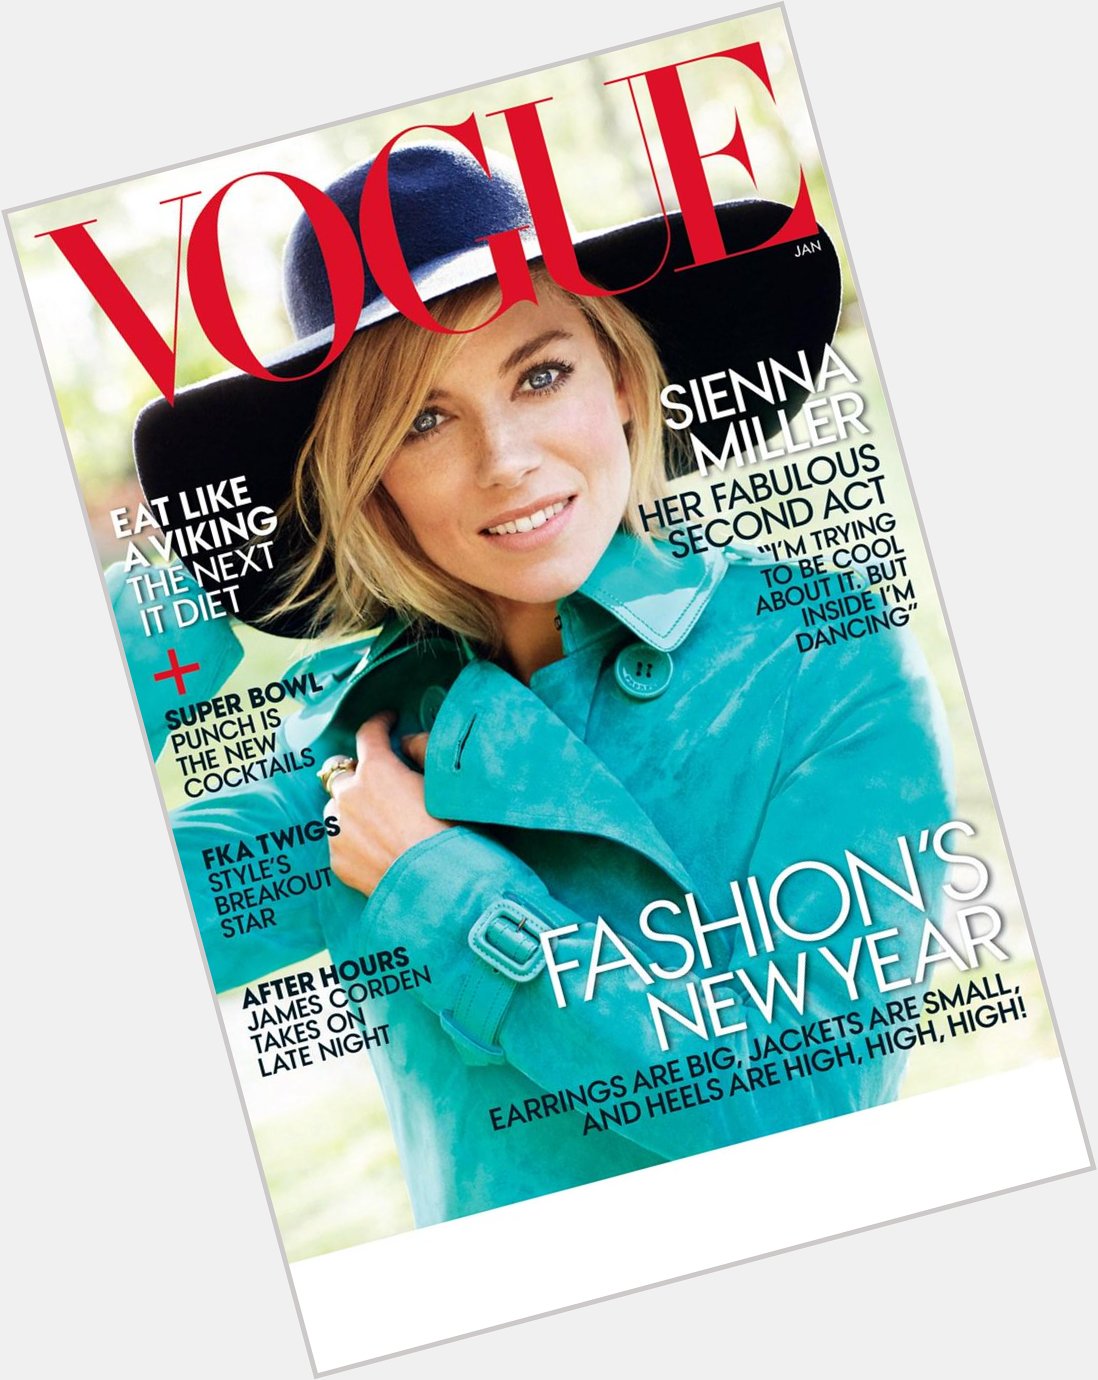 Happy Birthday Sienna Miller! Have you seen her new Vogue cover? 